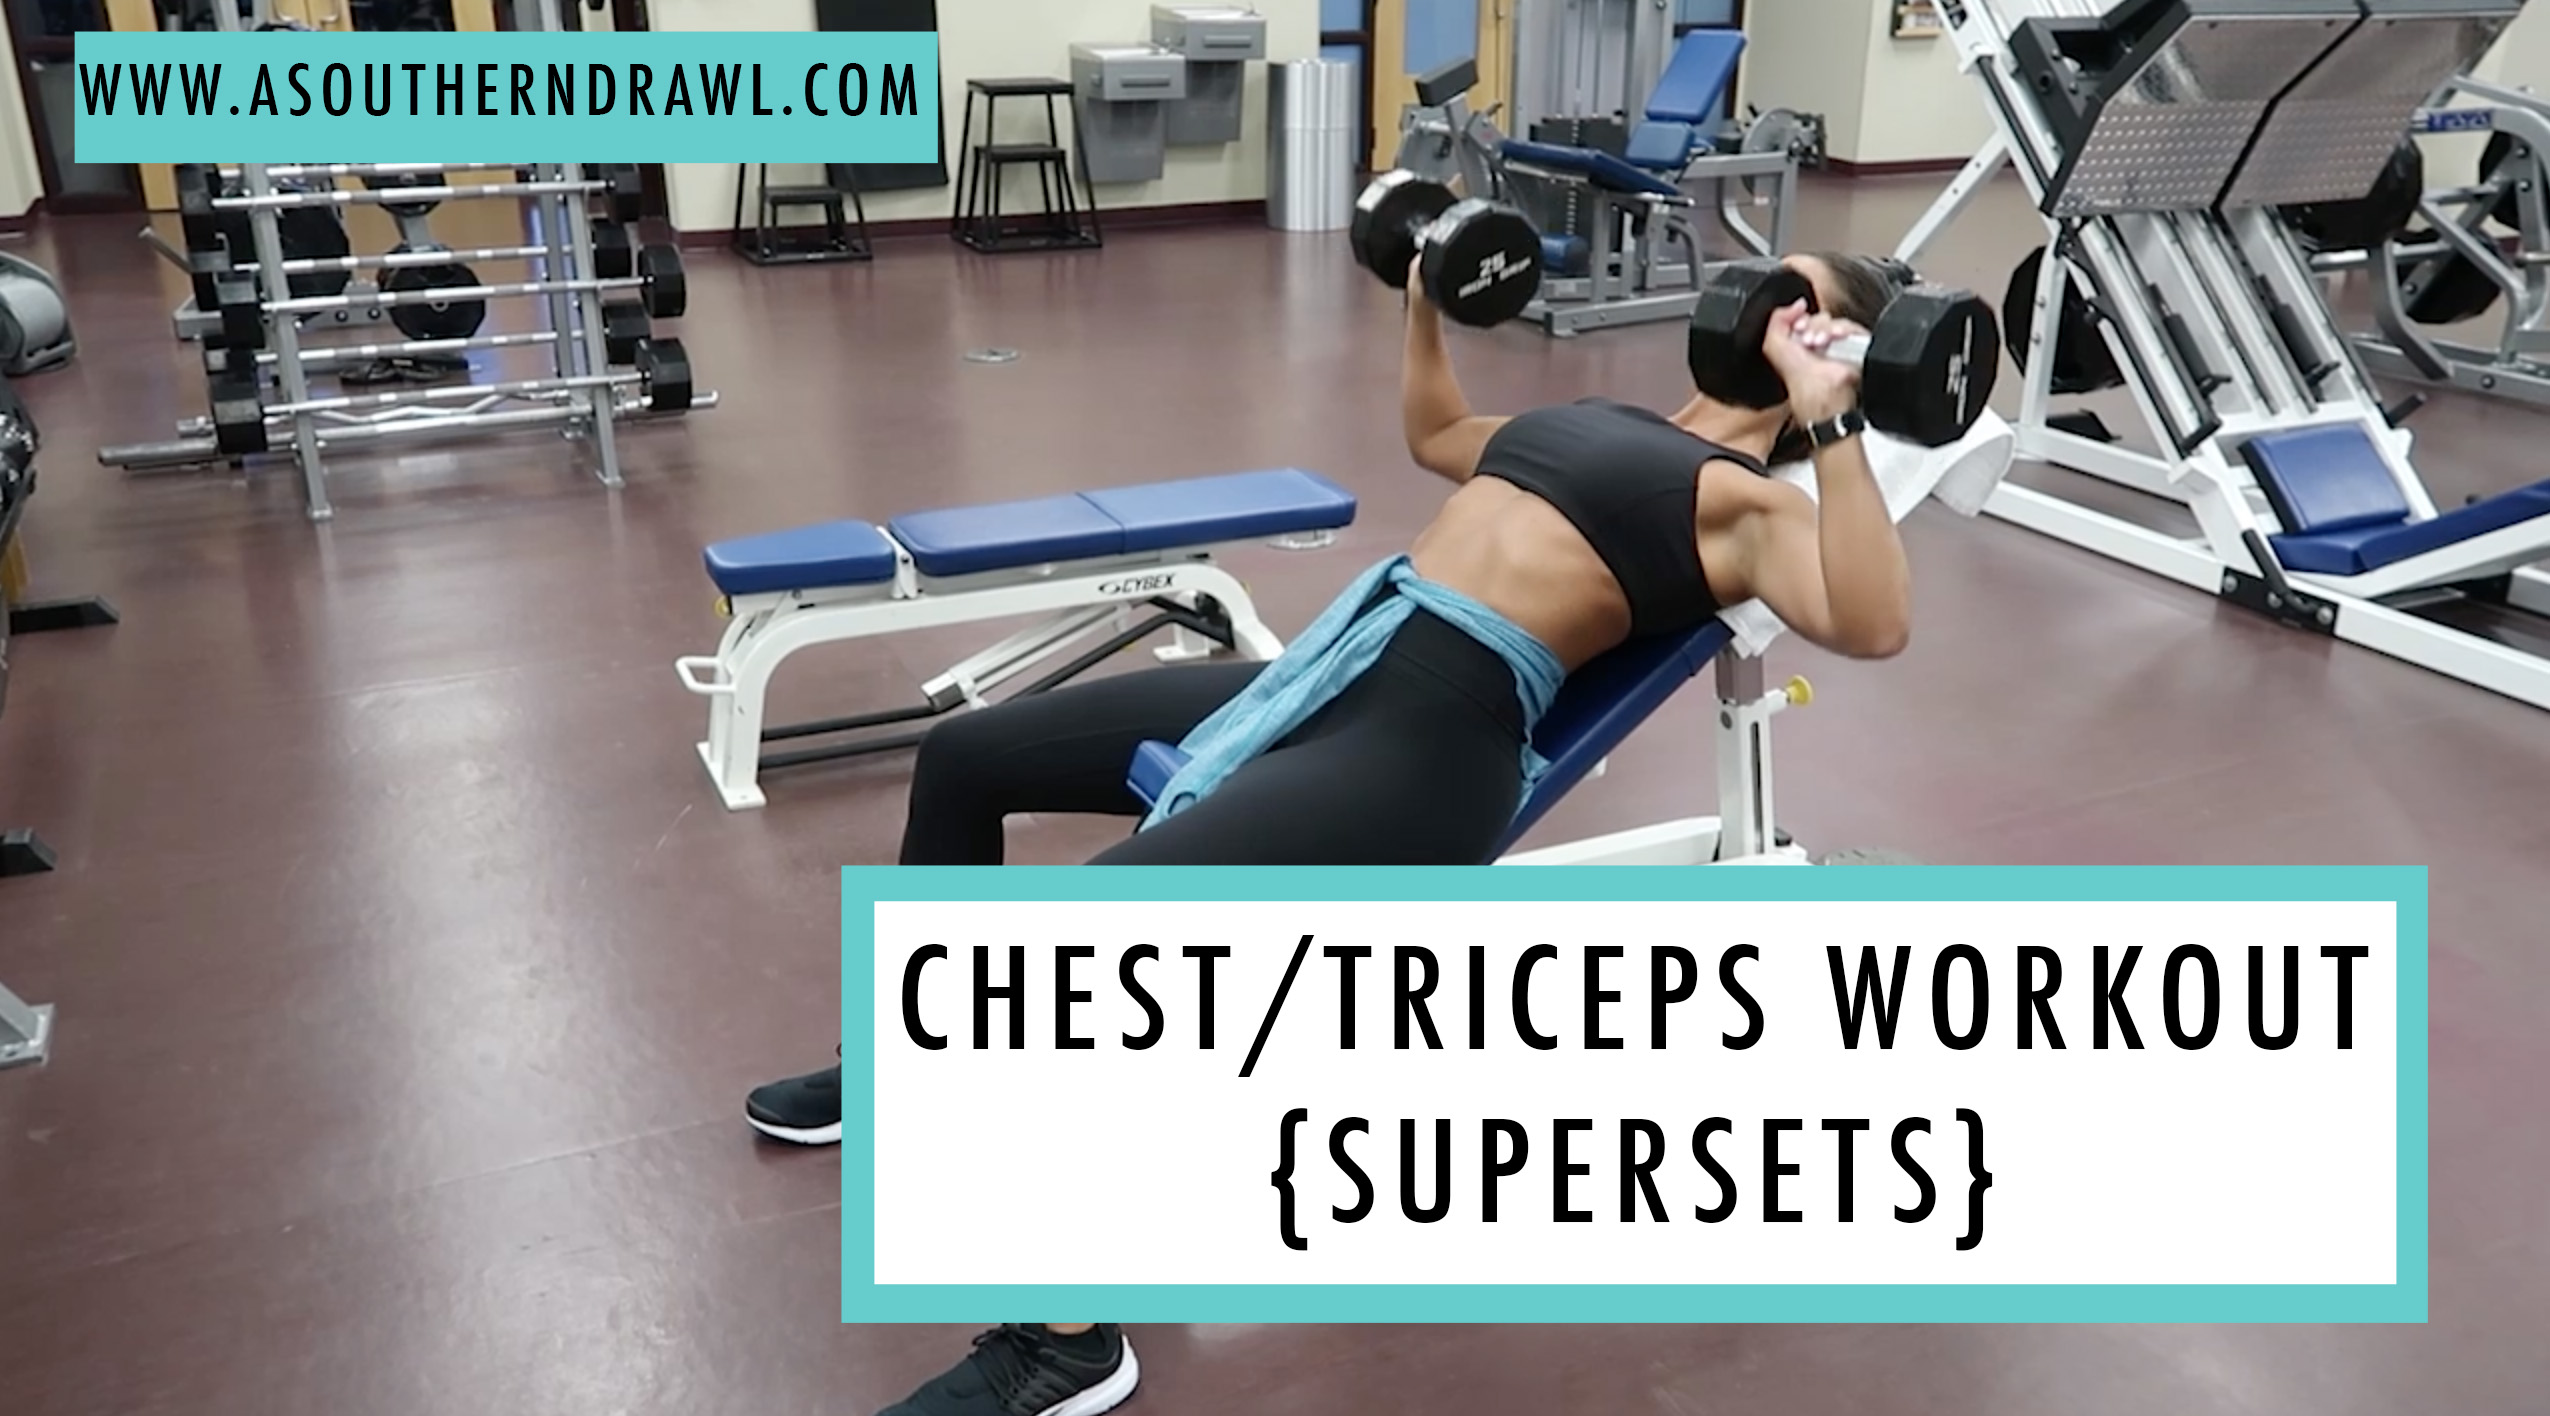 #FitWithASD Video: Chest &amp; Triceps Workout | A Southern Drawl